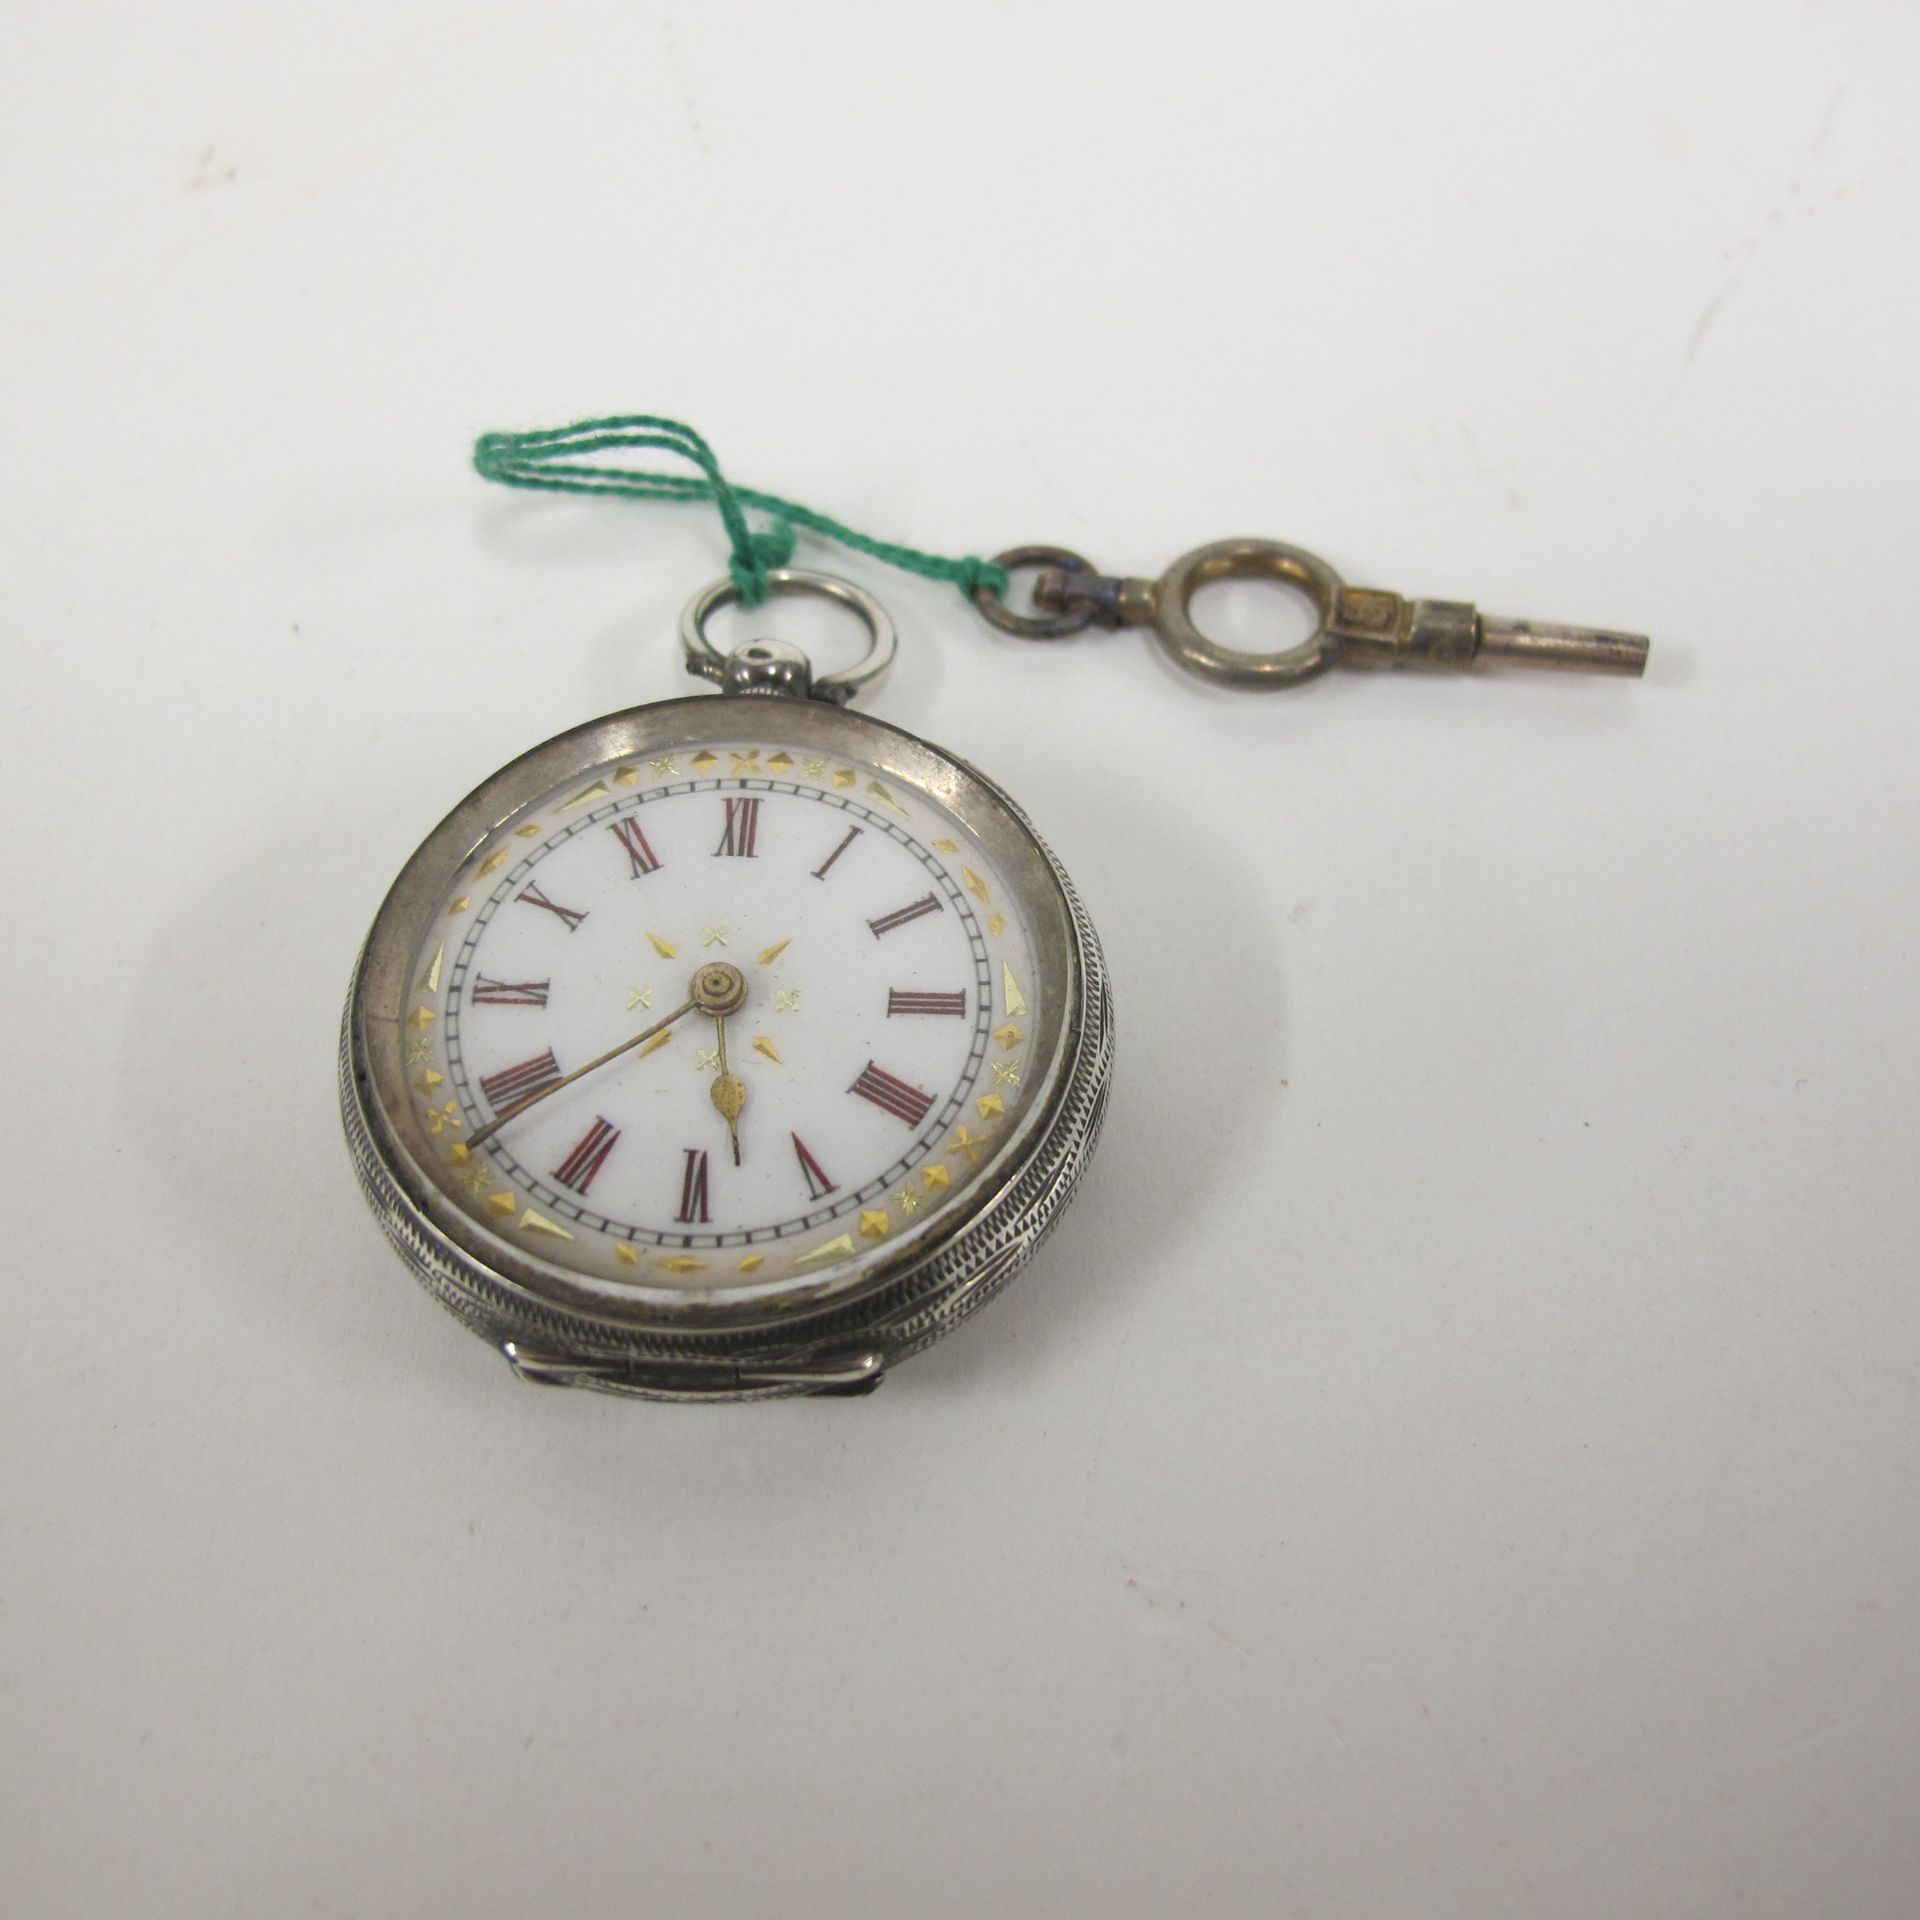 Antique Swiss Silver Fob Watch in a Tortoiseshell Antique Case (est £80-£120) - Image 3 of 7